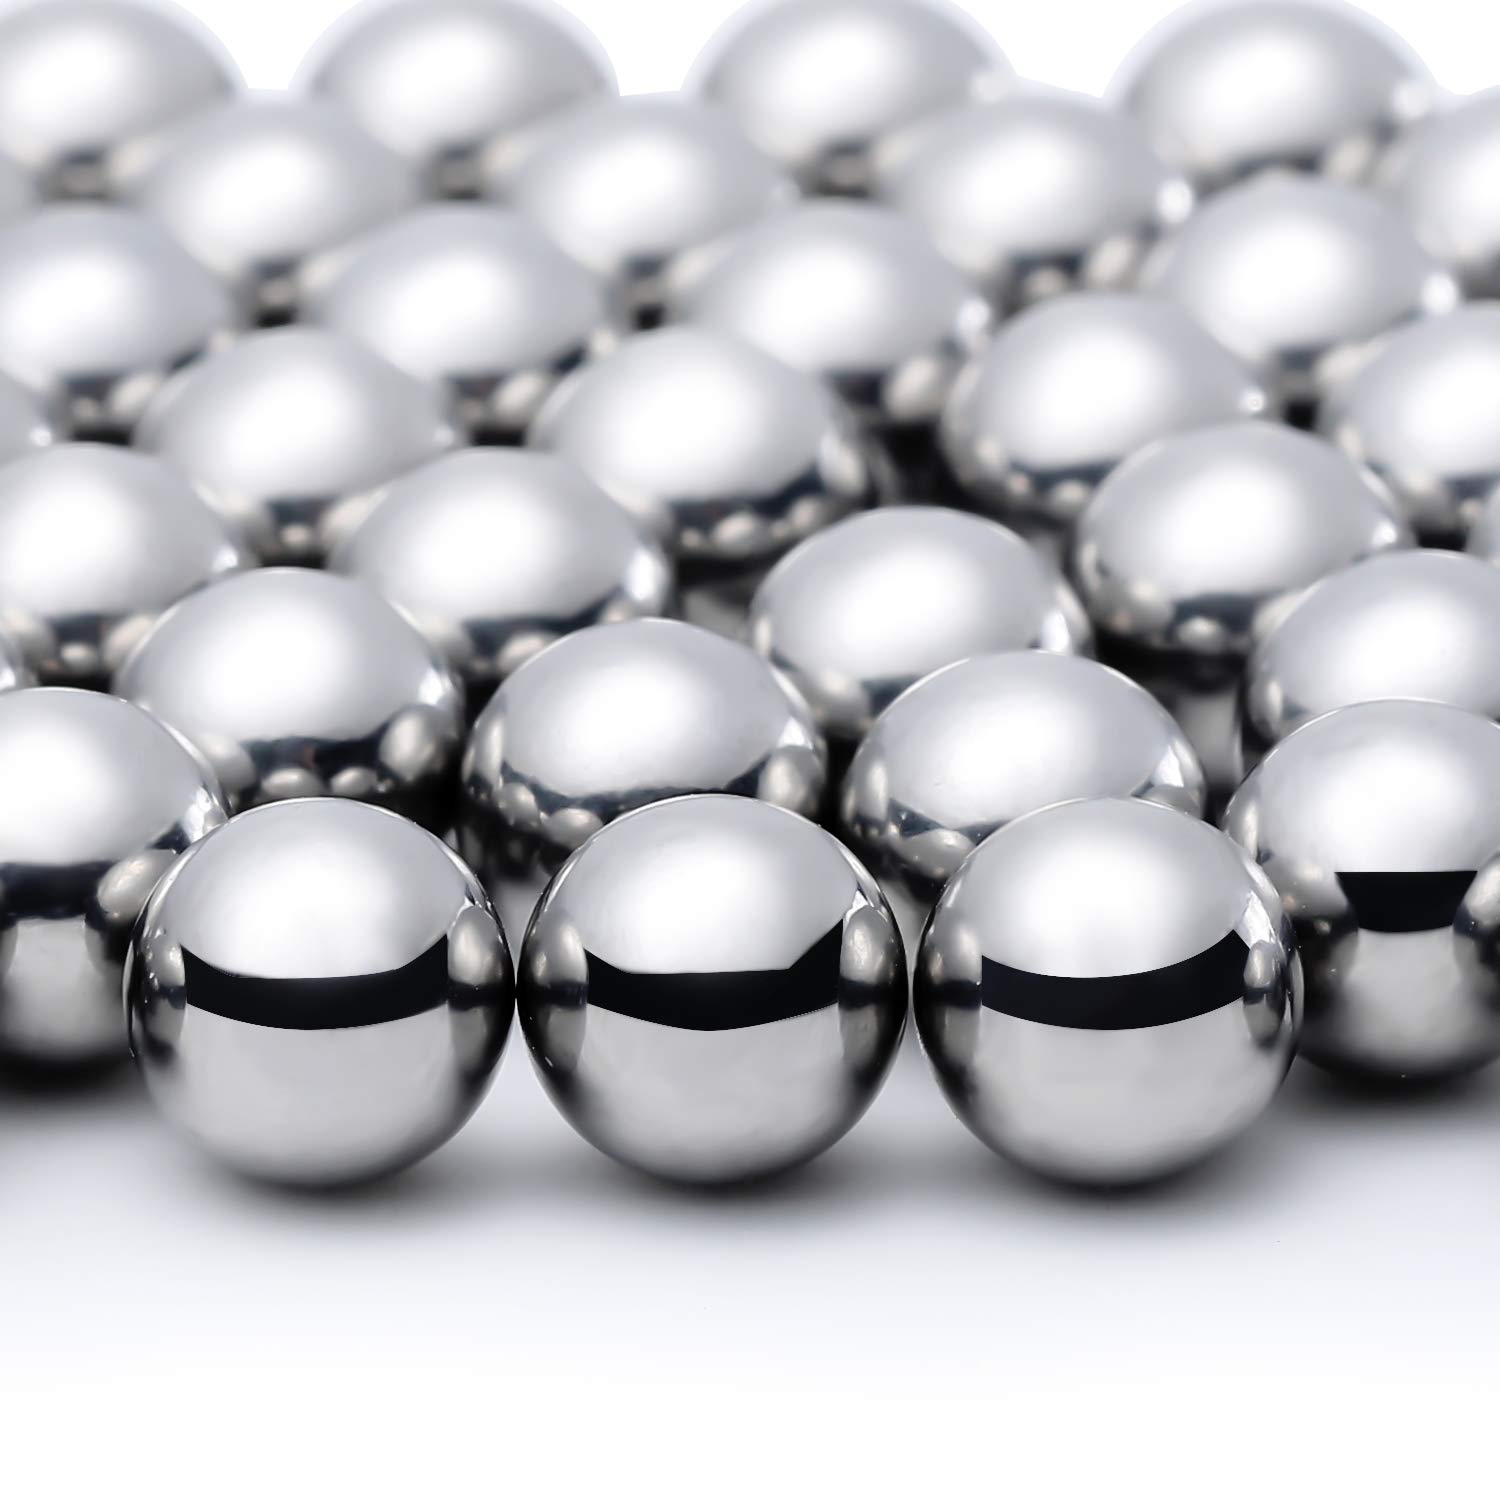 PLAFOPE 5pcs Steel Ball Bearing Paint Mixing Balls Steel Run Steel Bow  Mixing Agitator Balls Metal Balls Lead Balls Precision Balls Heavy g25 Nail  Polish Stainless Steel: : Industrial & Scientific